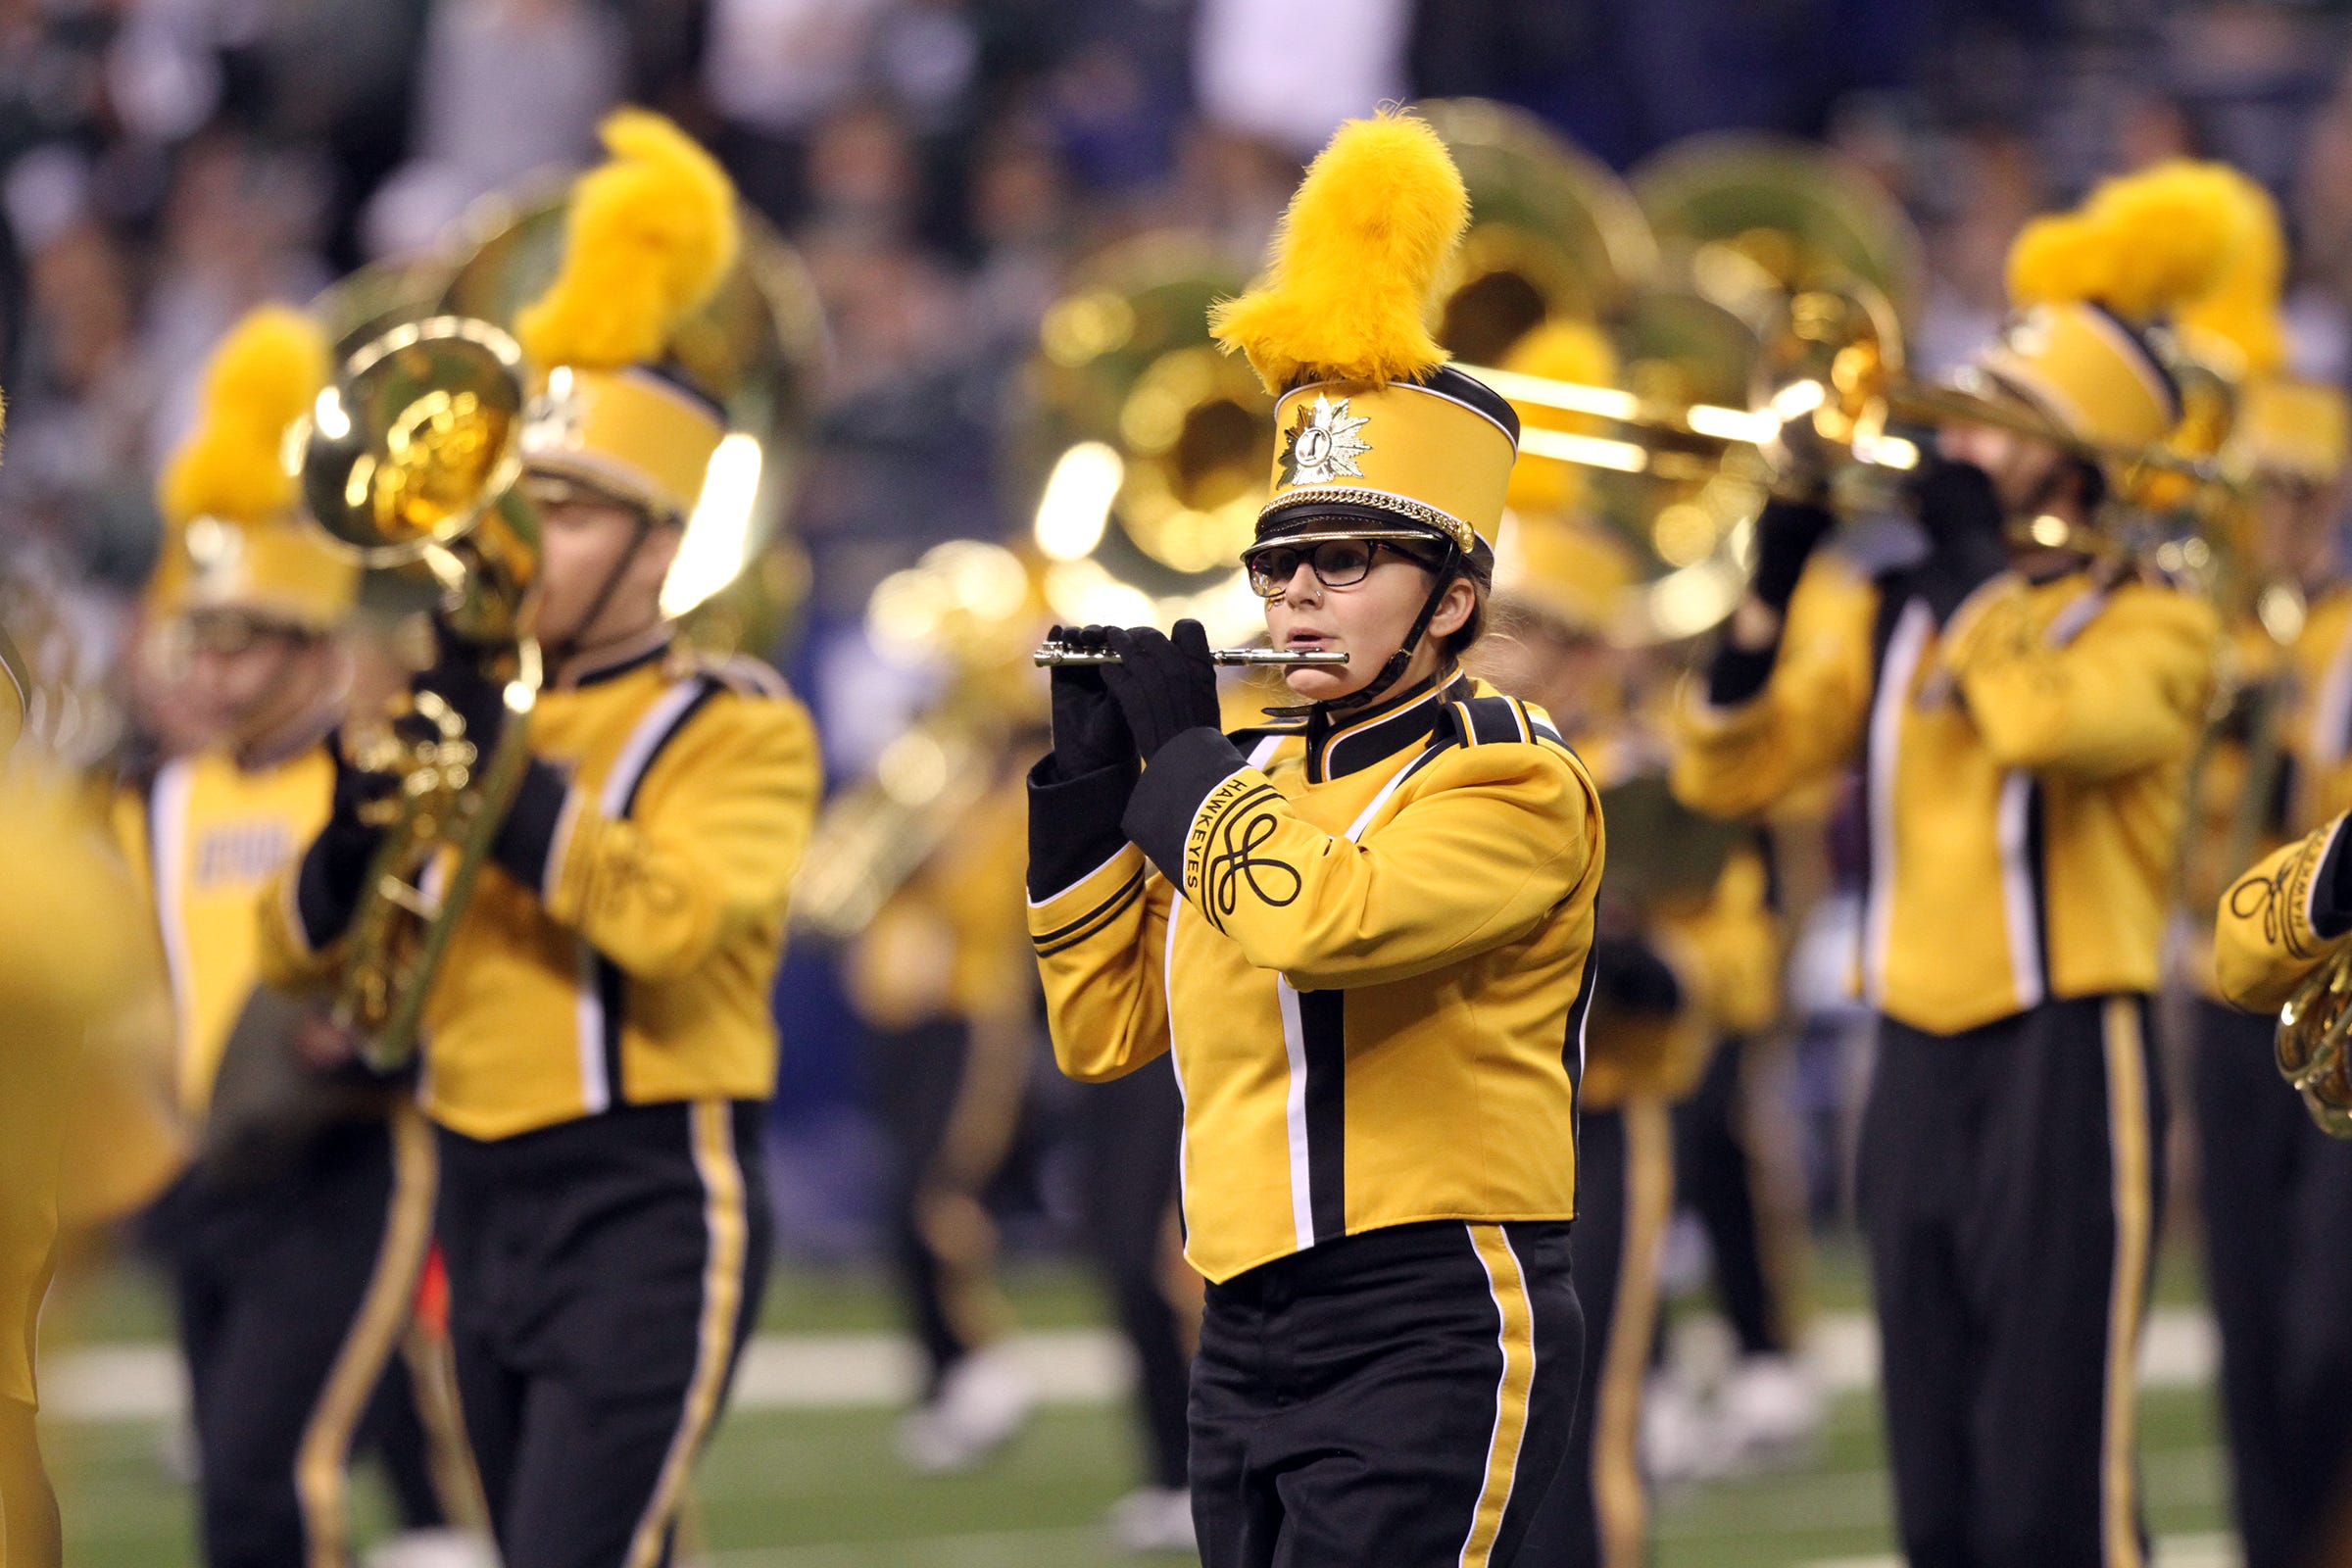 The Hawkeye Marching Band performs prior to Iowa's Big Ten Championship game against Michigan State at Lucas Oil Stadium in Indianapolis, Ind. on Saturday, Dec. 5, 2015.